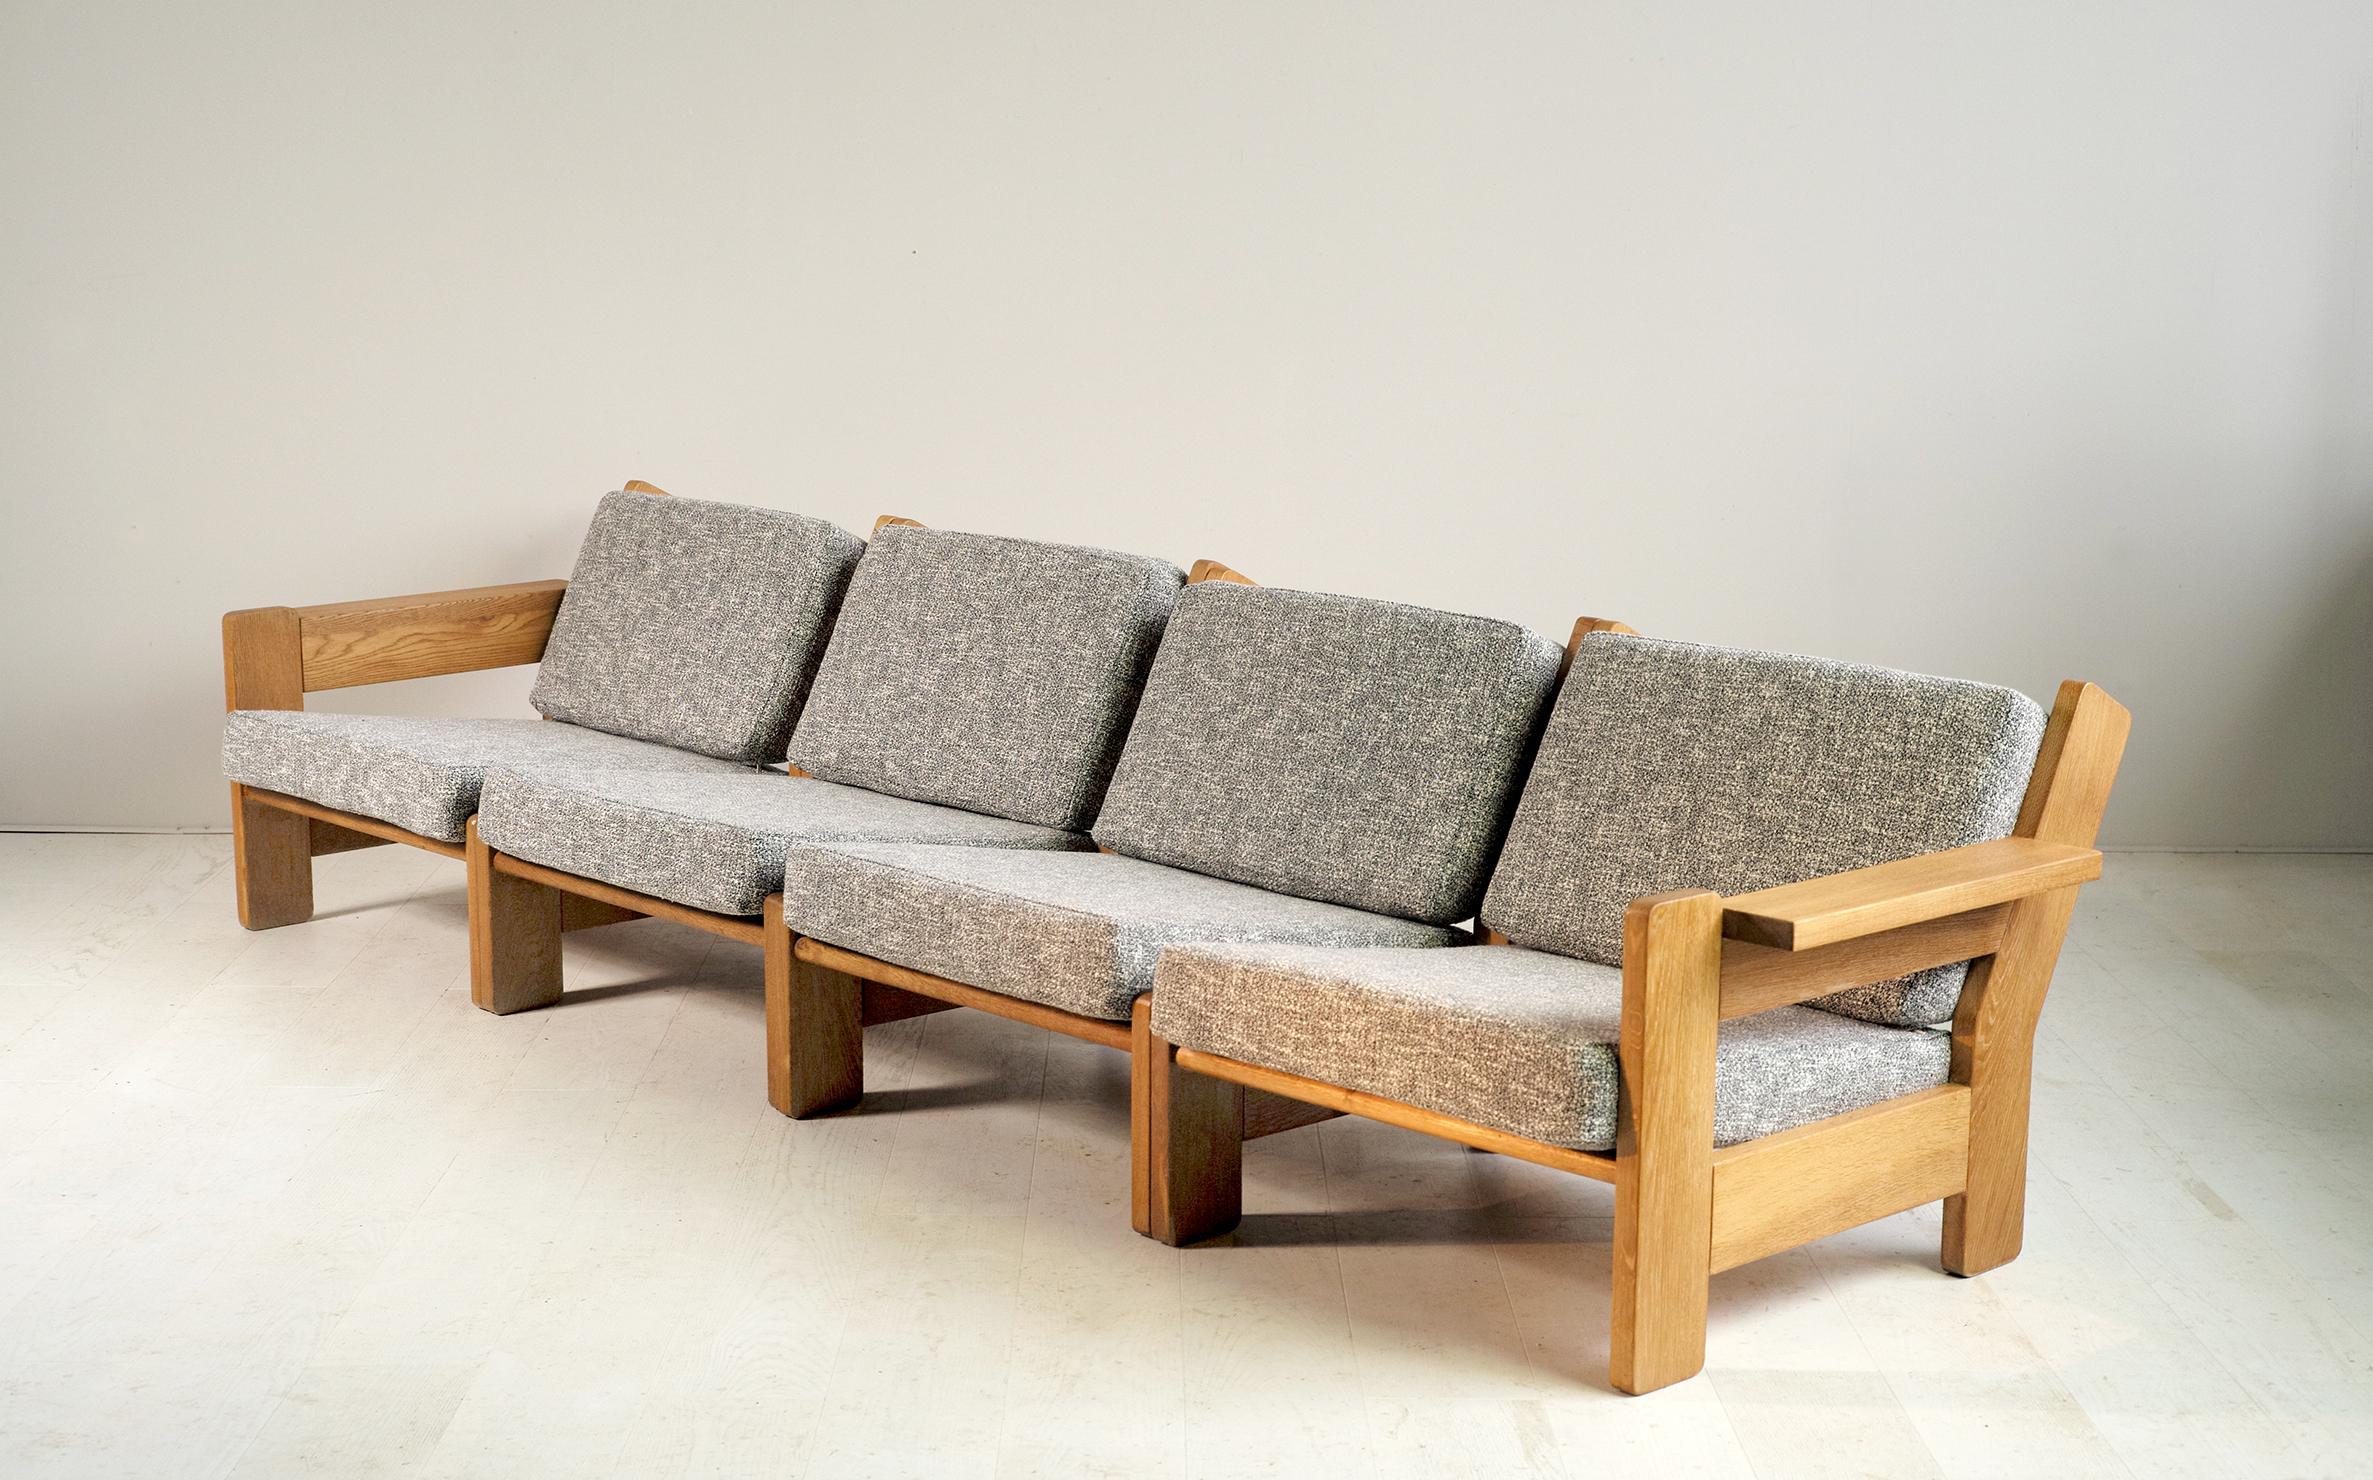 Mid-Century Modern Modular Sectional Sofa in Blond Oak and Fabric, Northern Europe 1960